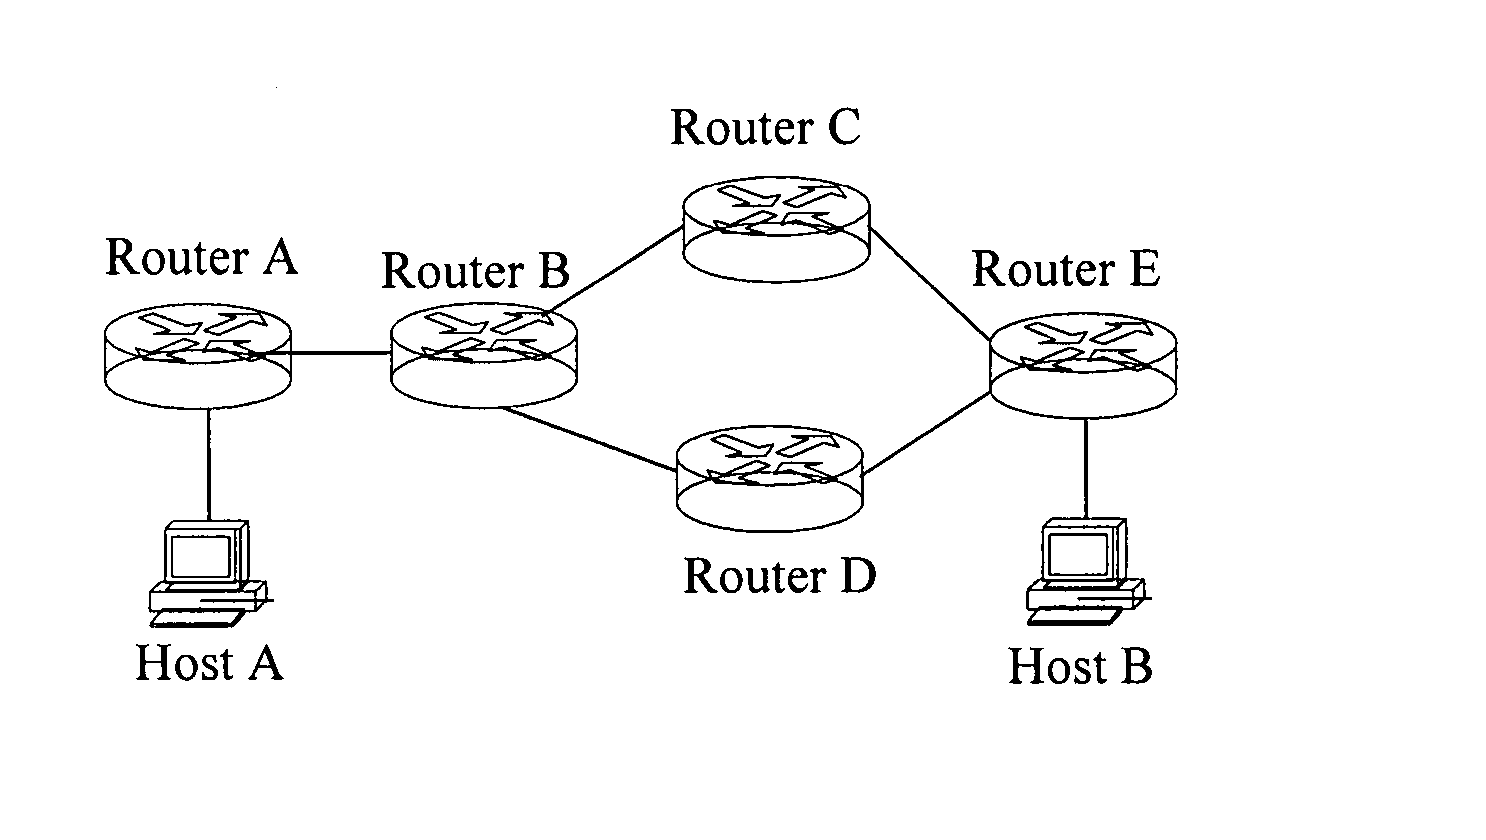 Method for Diagnosing the Router Which Supports Policy-Based Routing